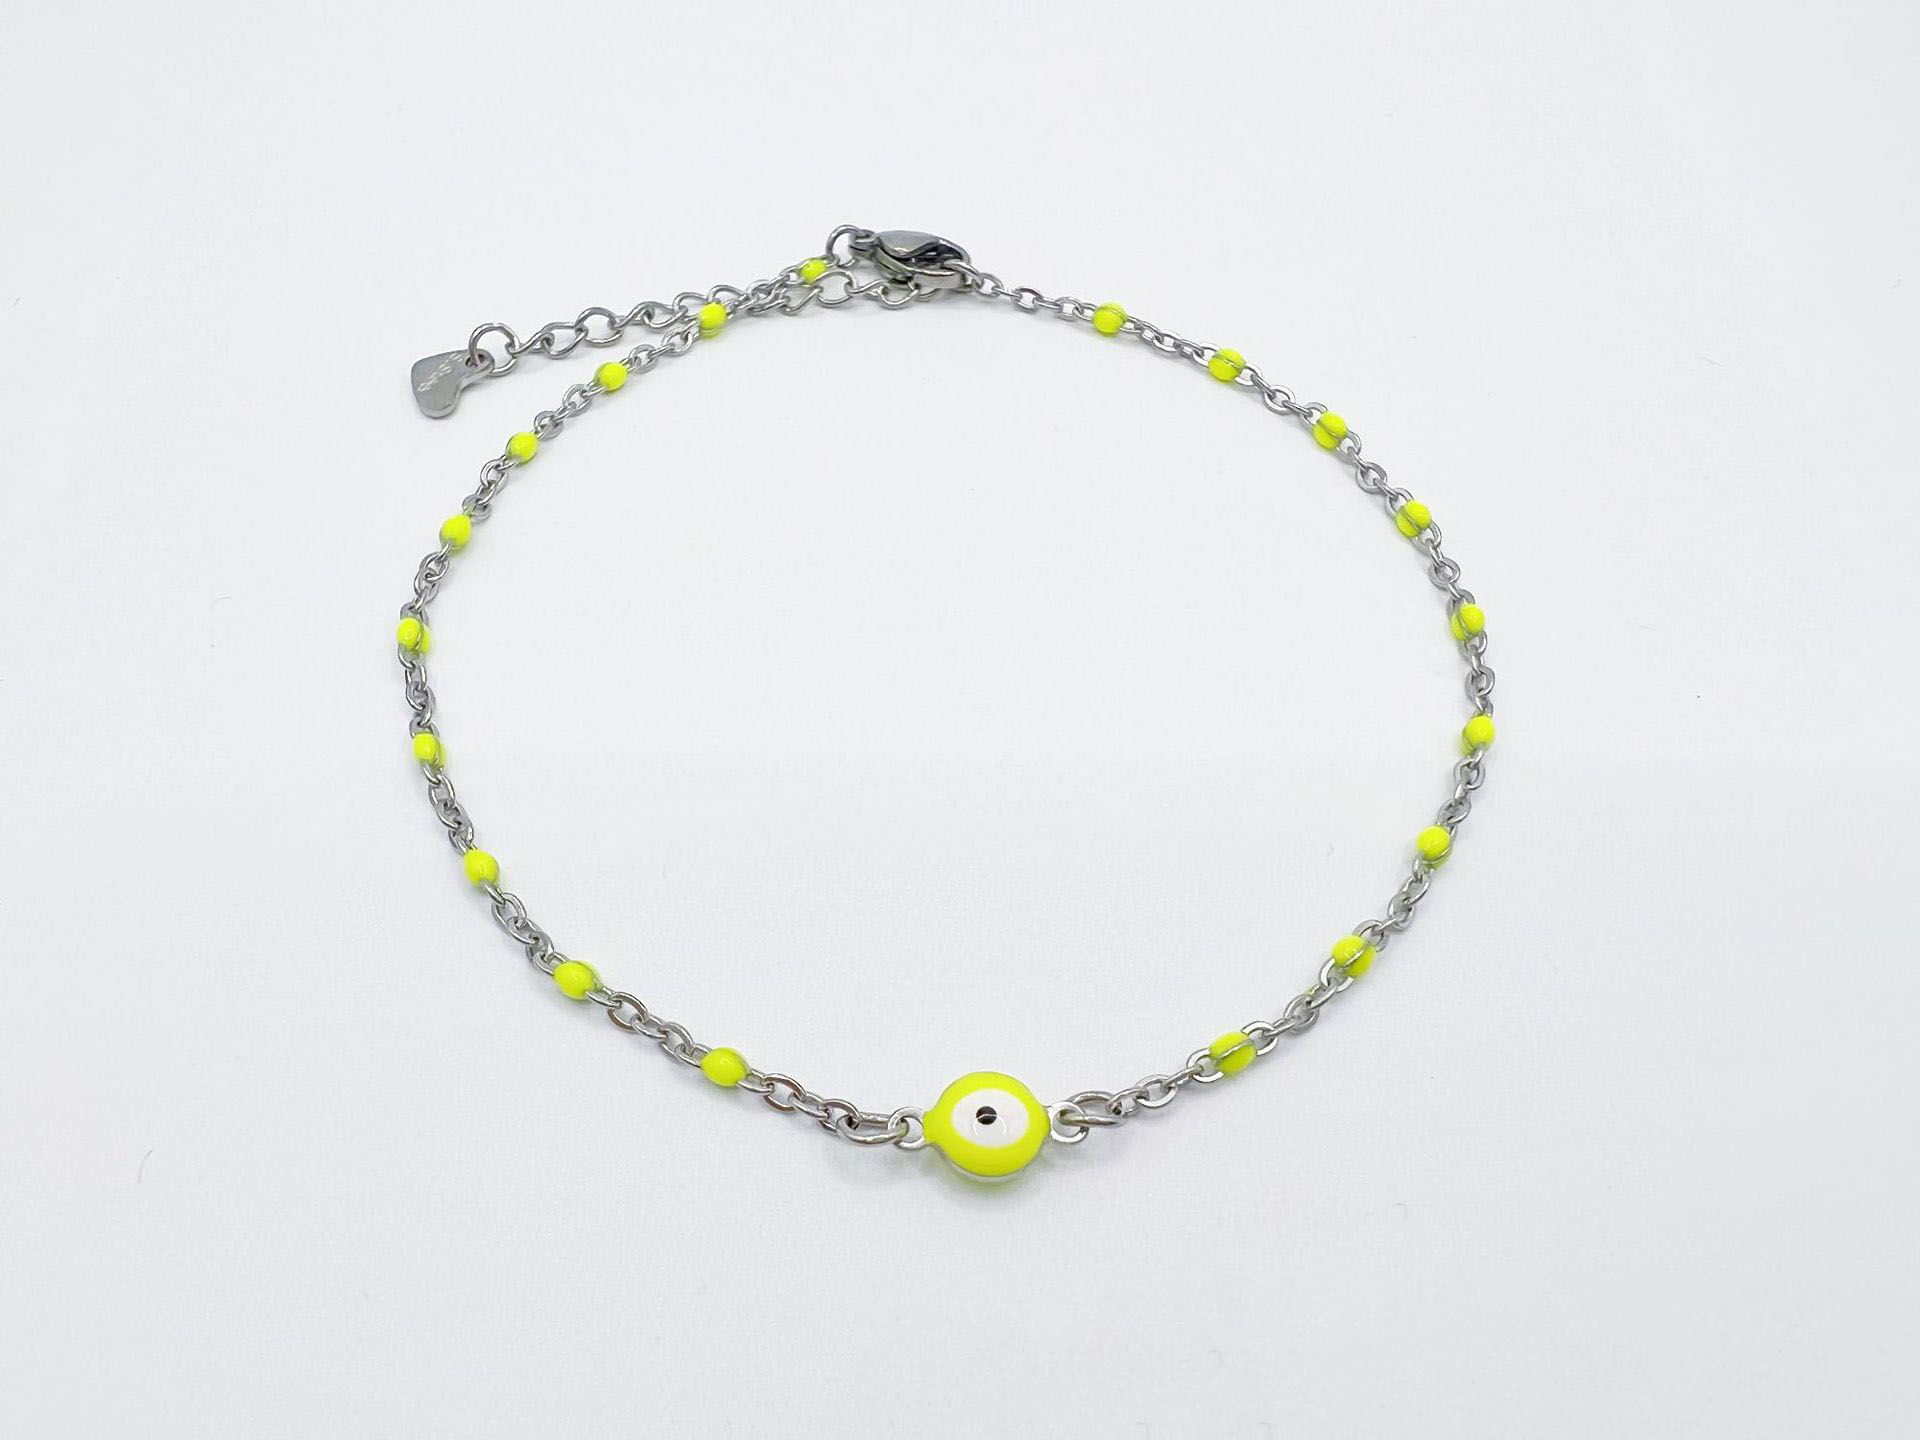 Steel color fluorescent yellow